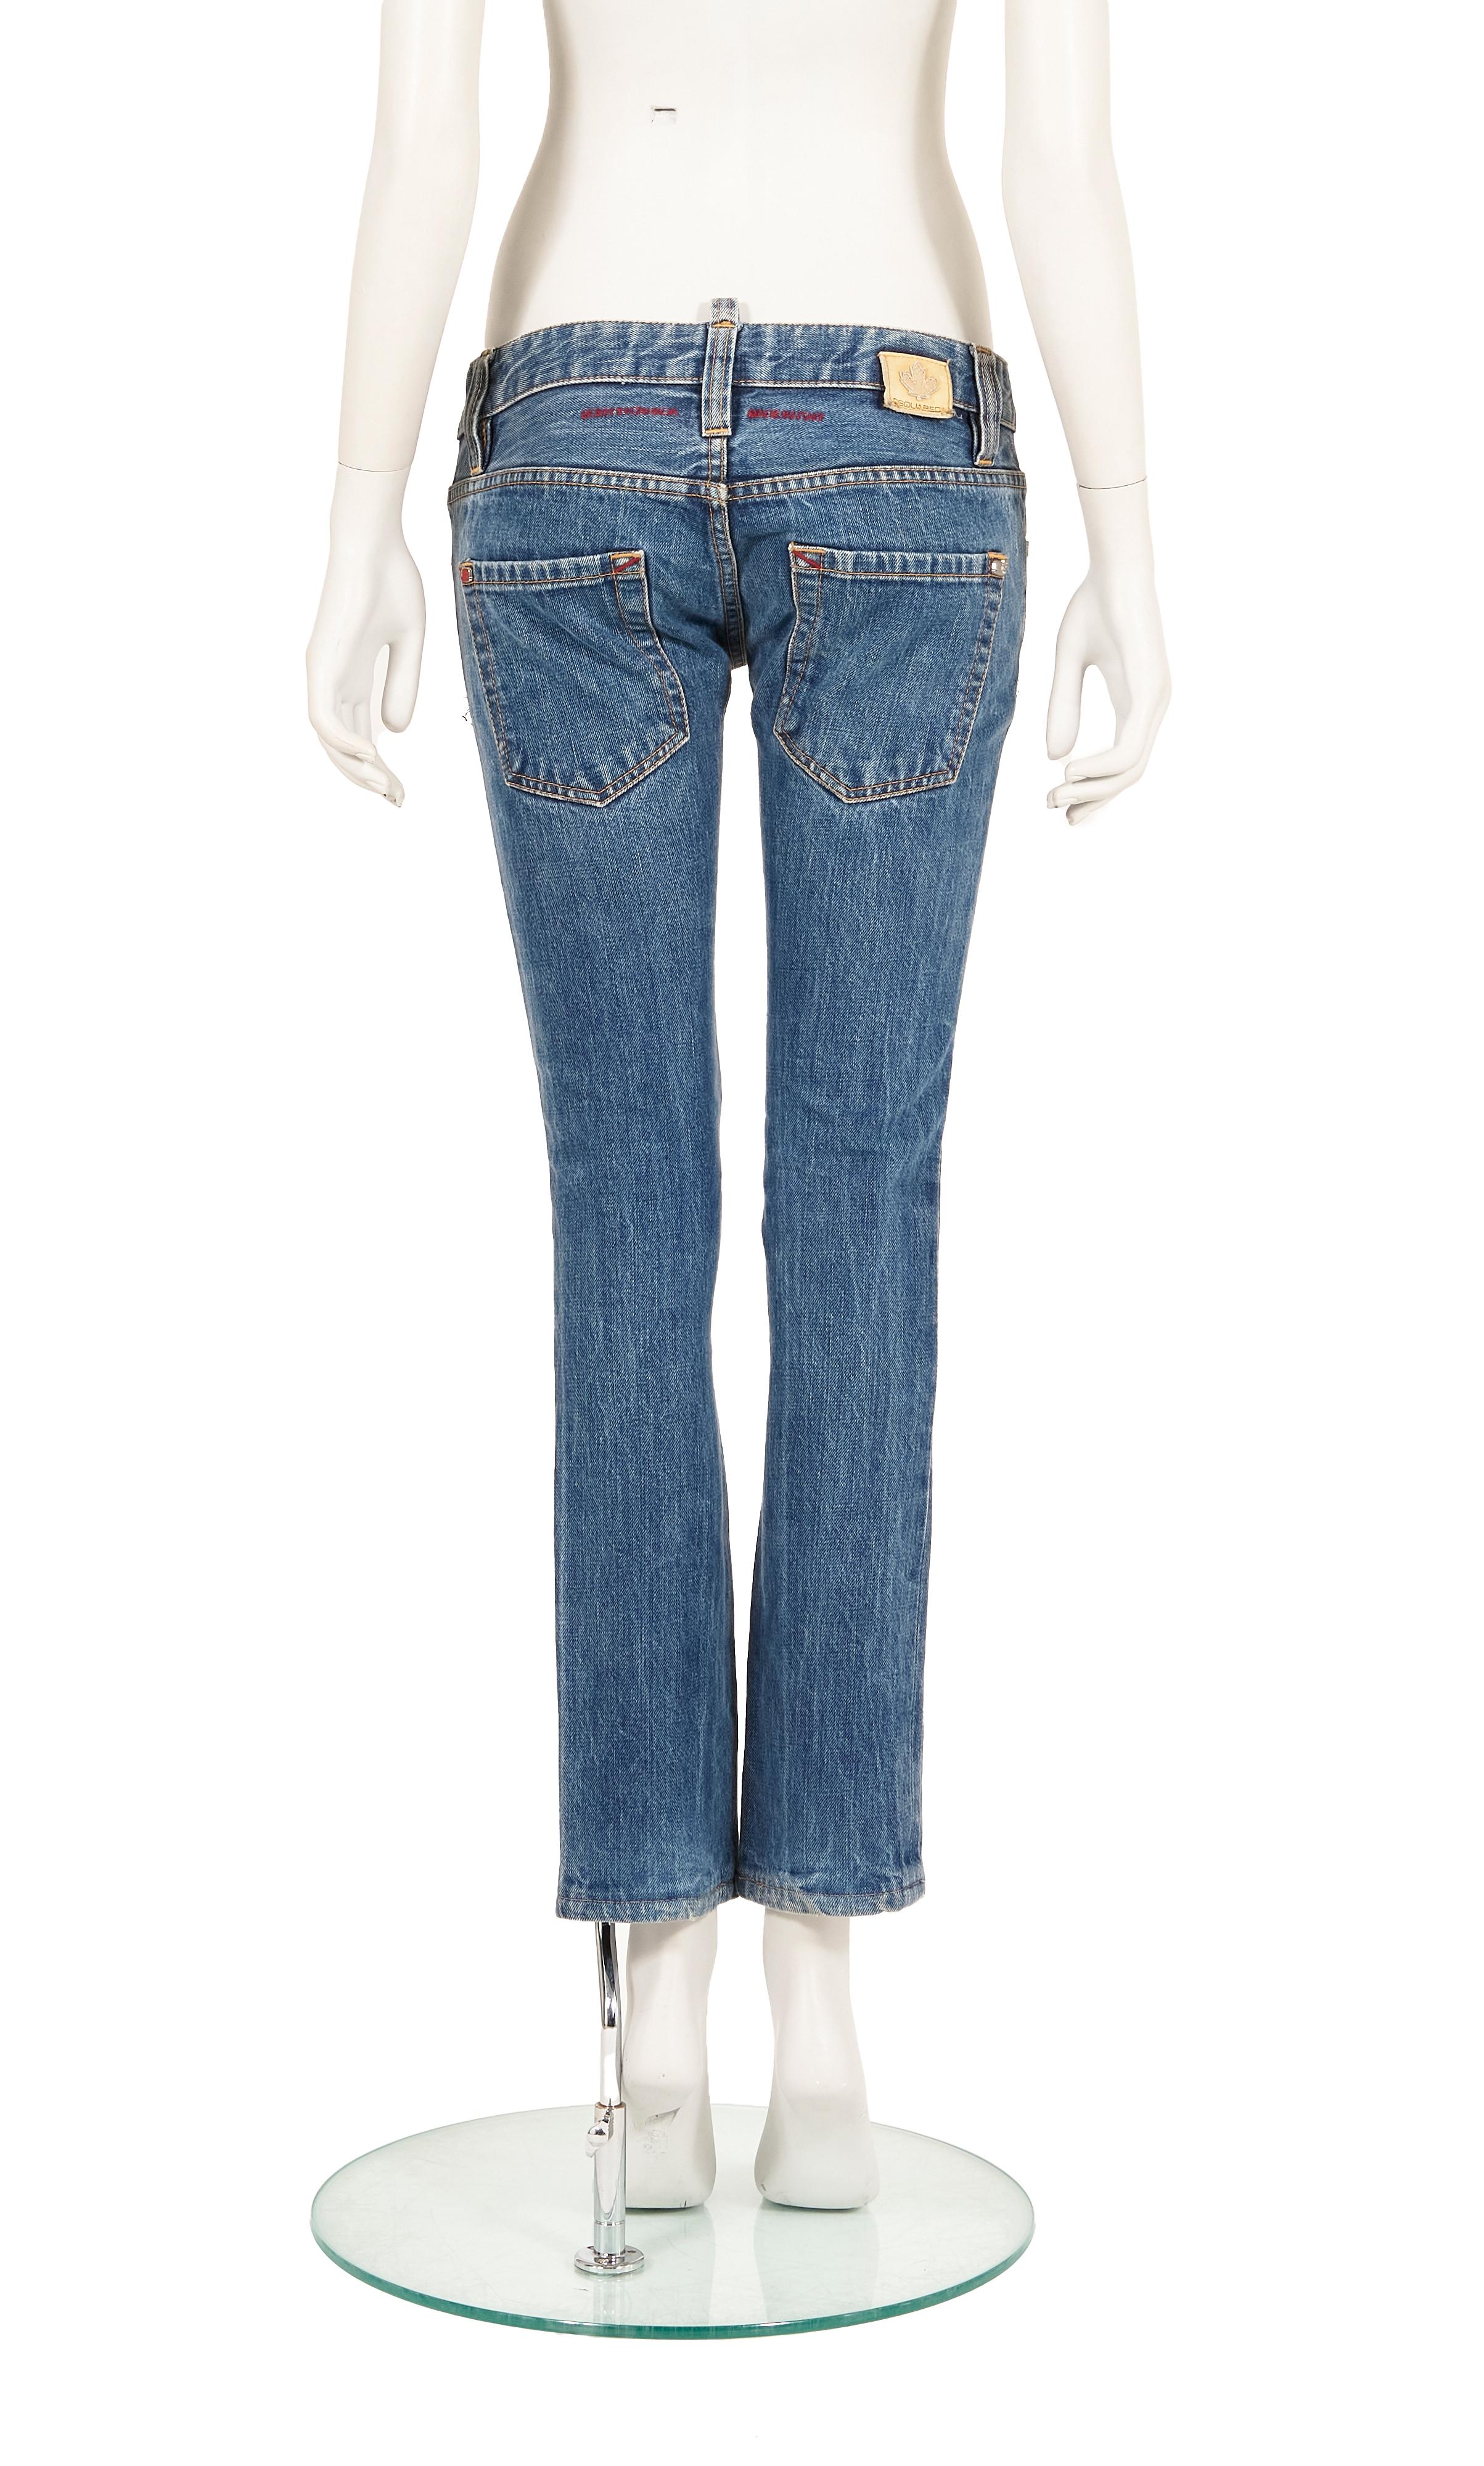 Dsquared2 S/S 2007 ultra low-rise skinny jeans In Excellent Condition For Sale In Rome, IT